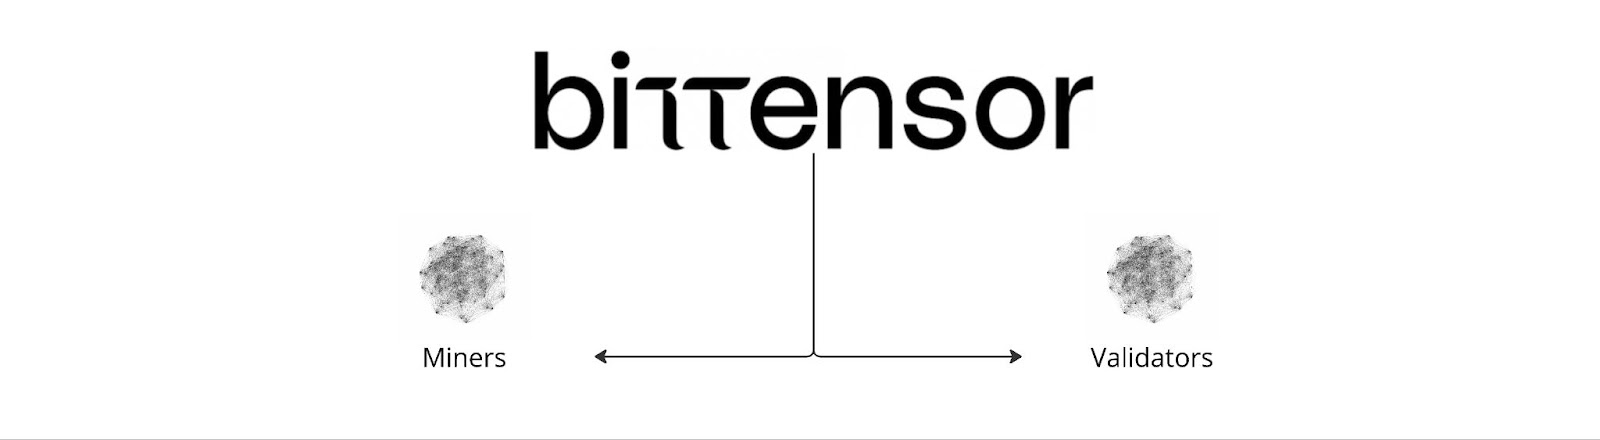 There are two kinds of nodes within the Bittensor Network